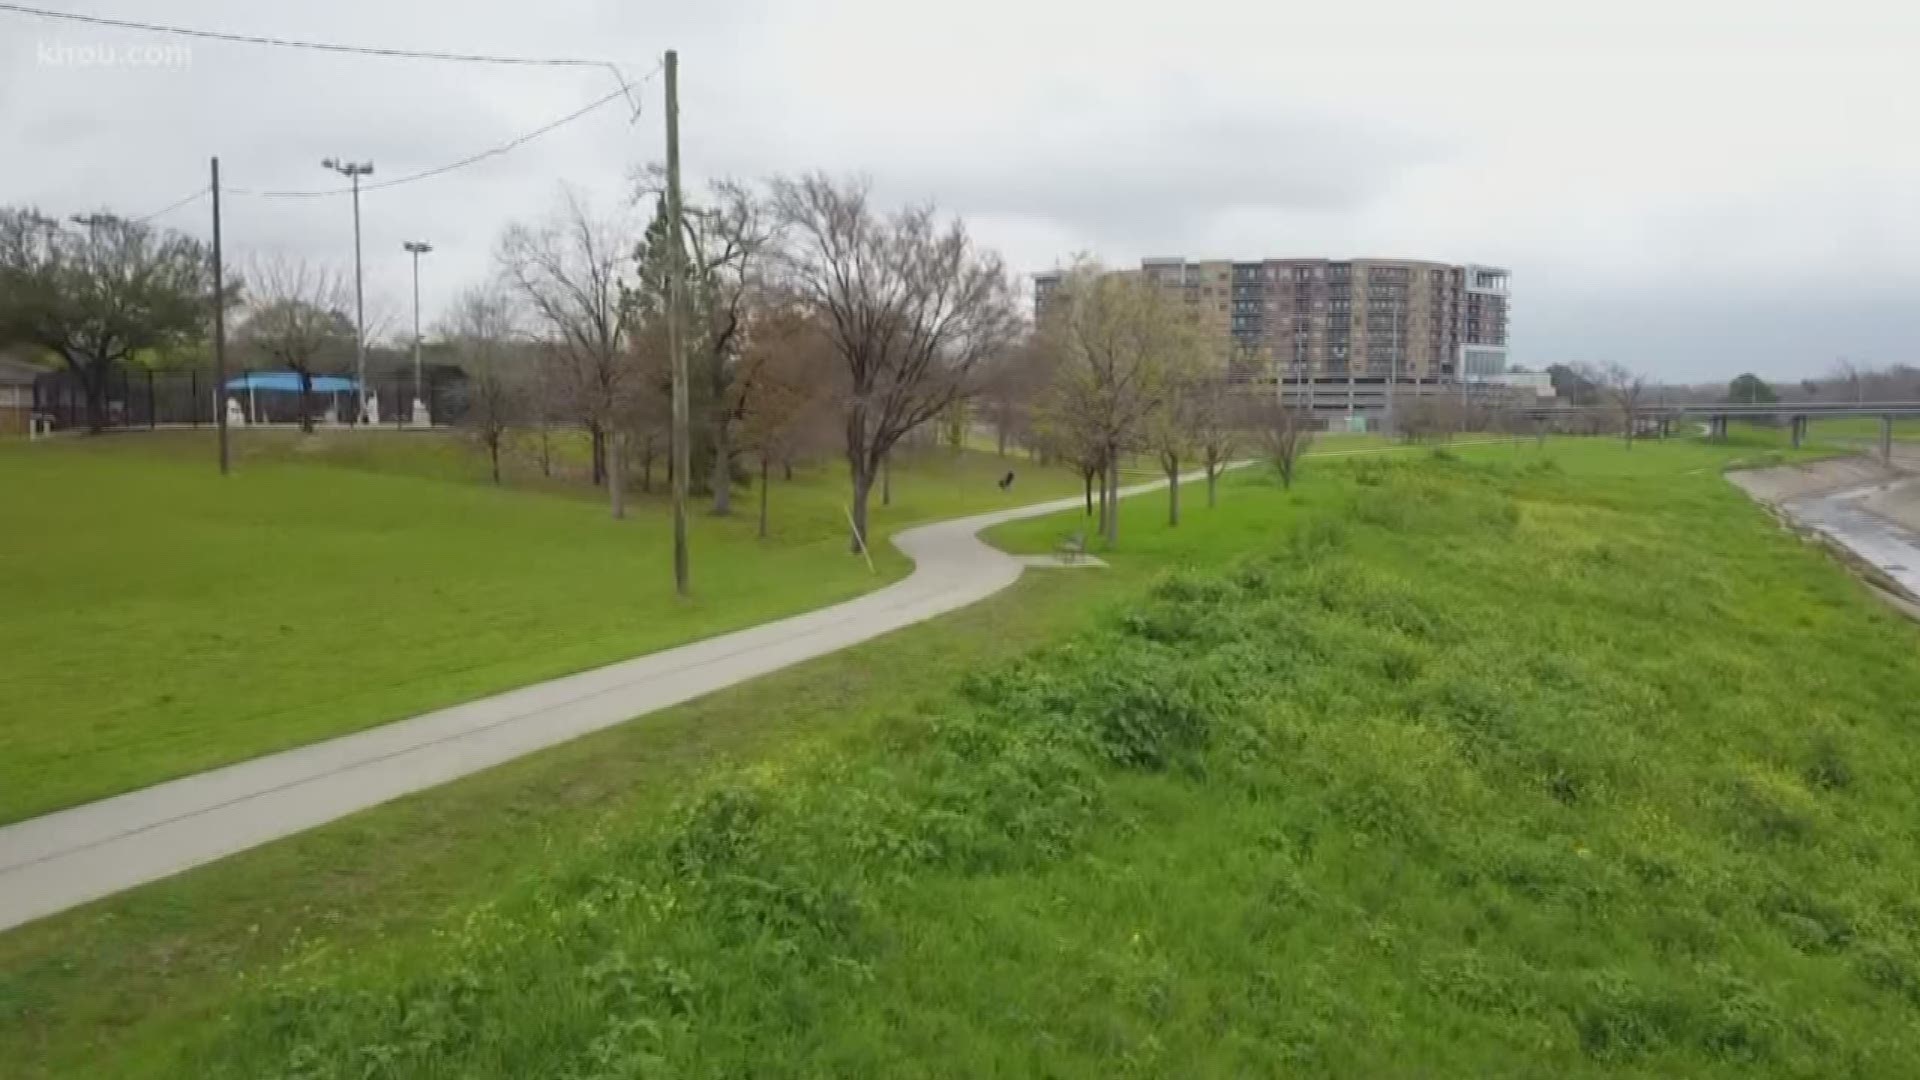 Harris County Precinct 1 is pledging $7.4 million to finish the Bayou Greenways 2020 project.